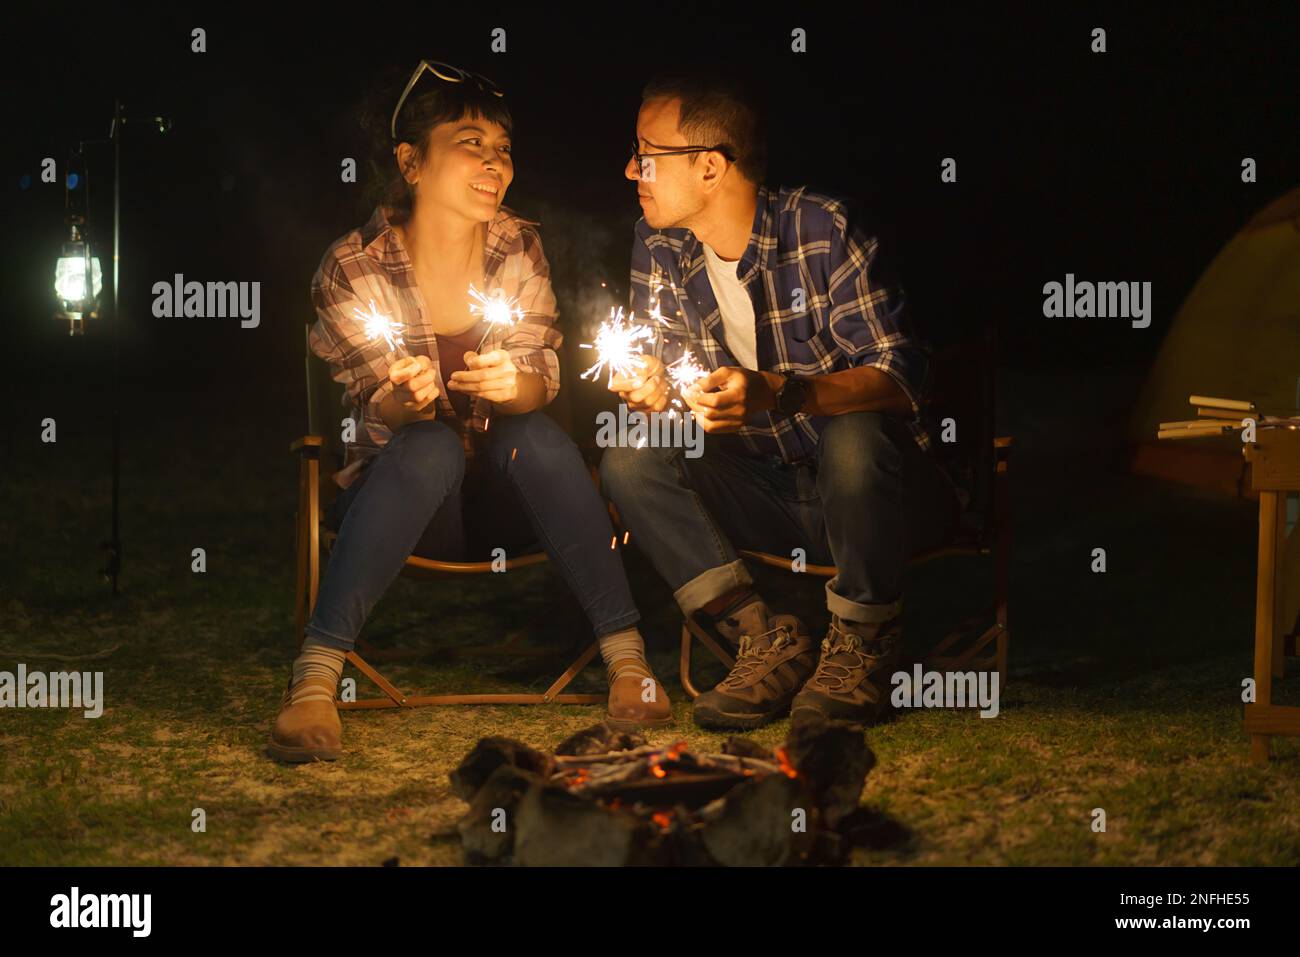 Asian couple is lighting sparkler fire at a campfire where they set up a tent to camp by the lake at night. Stock Photo